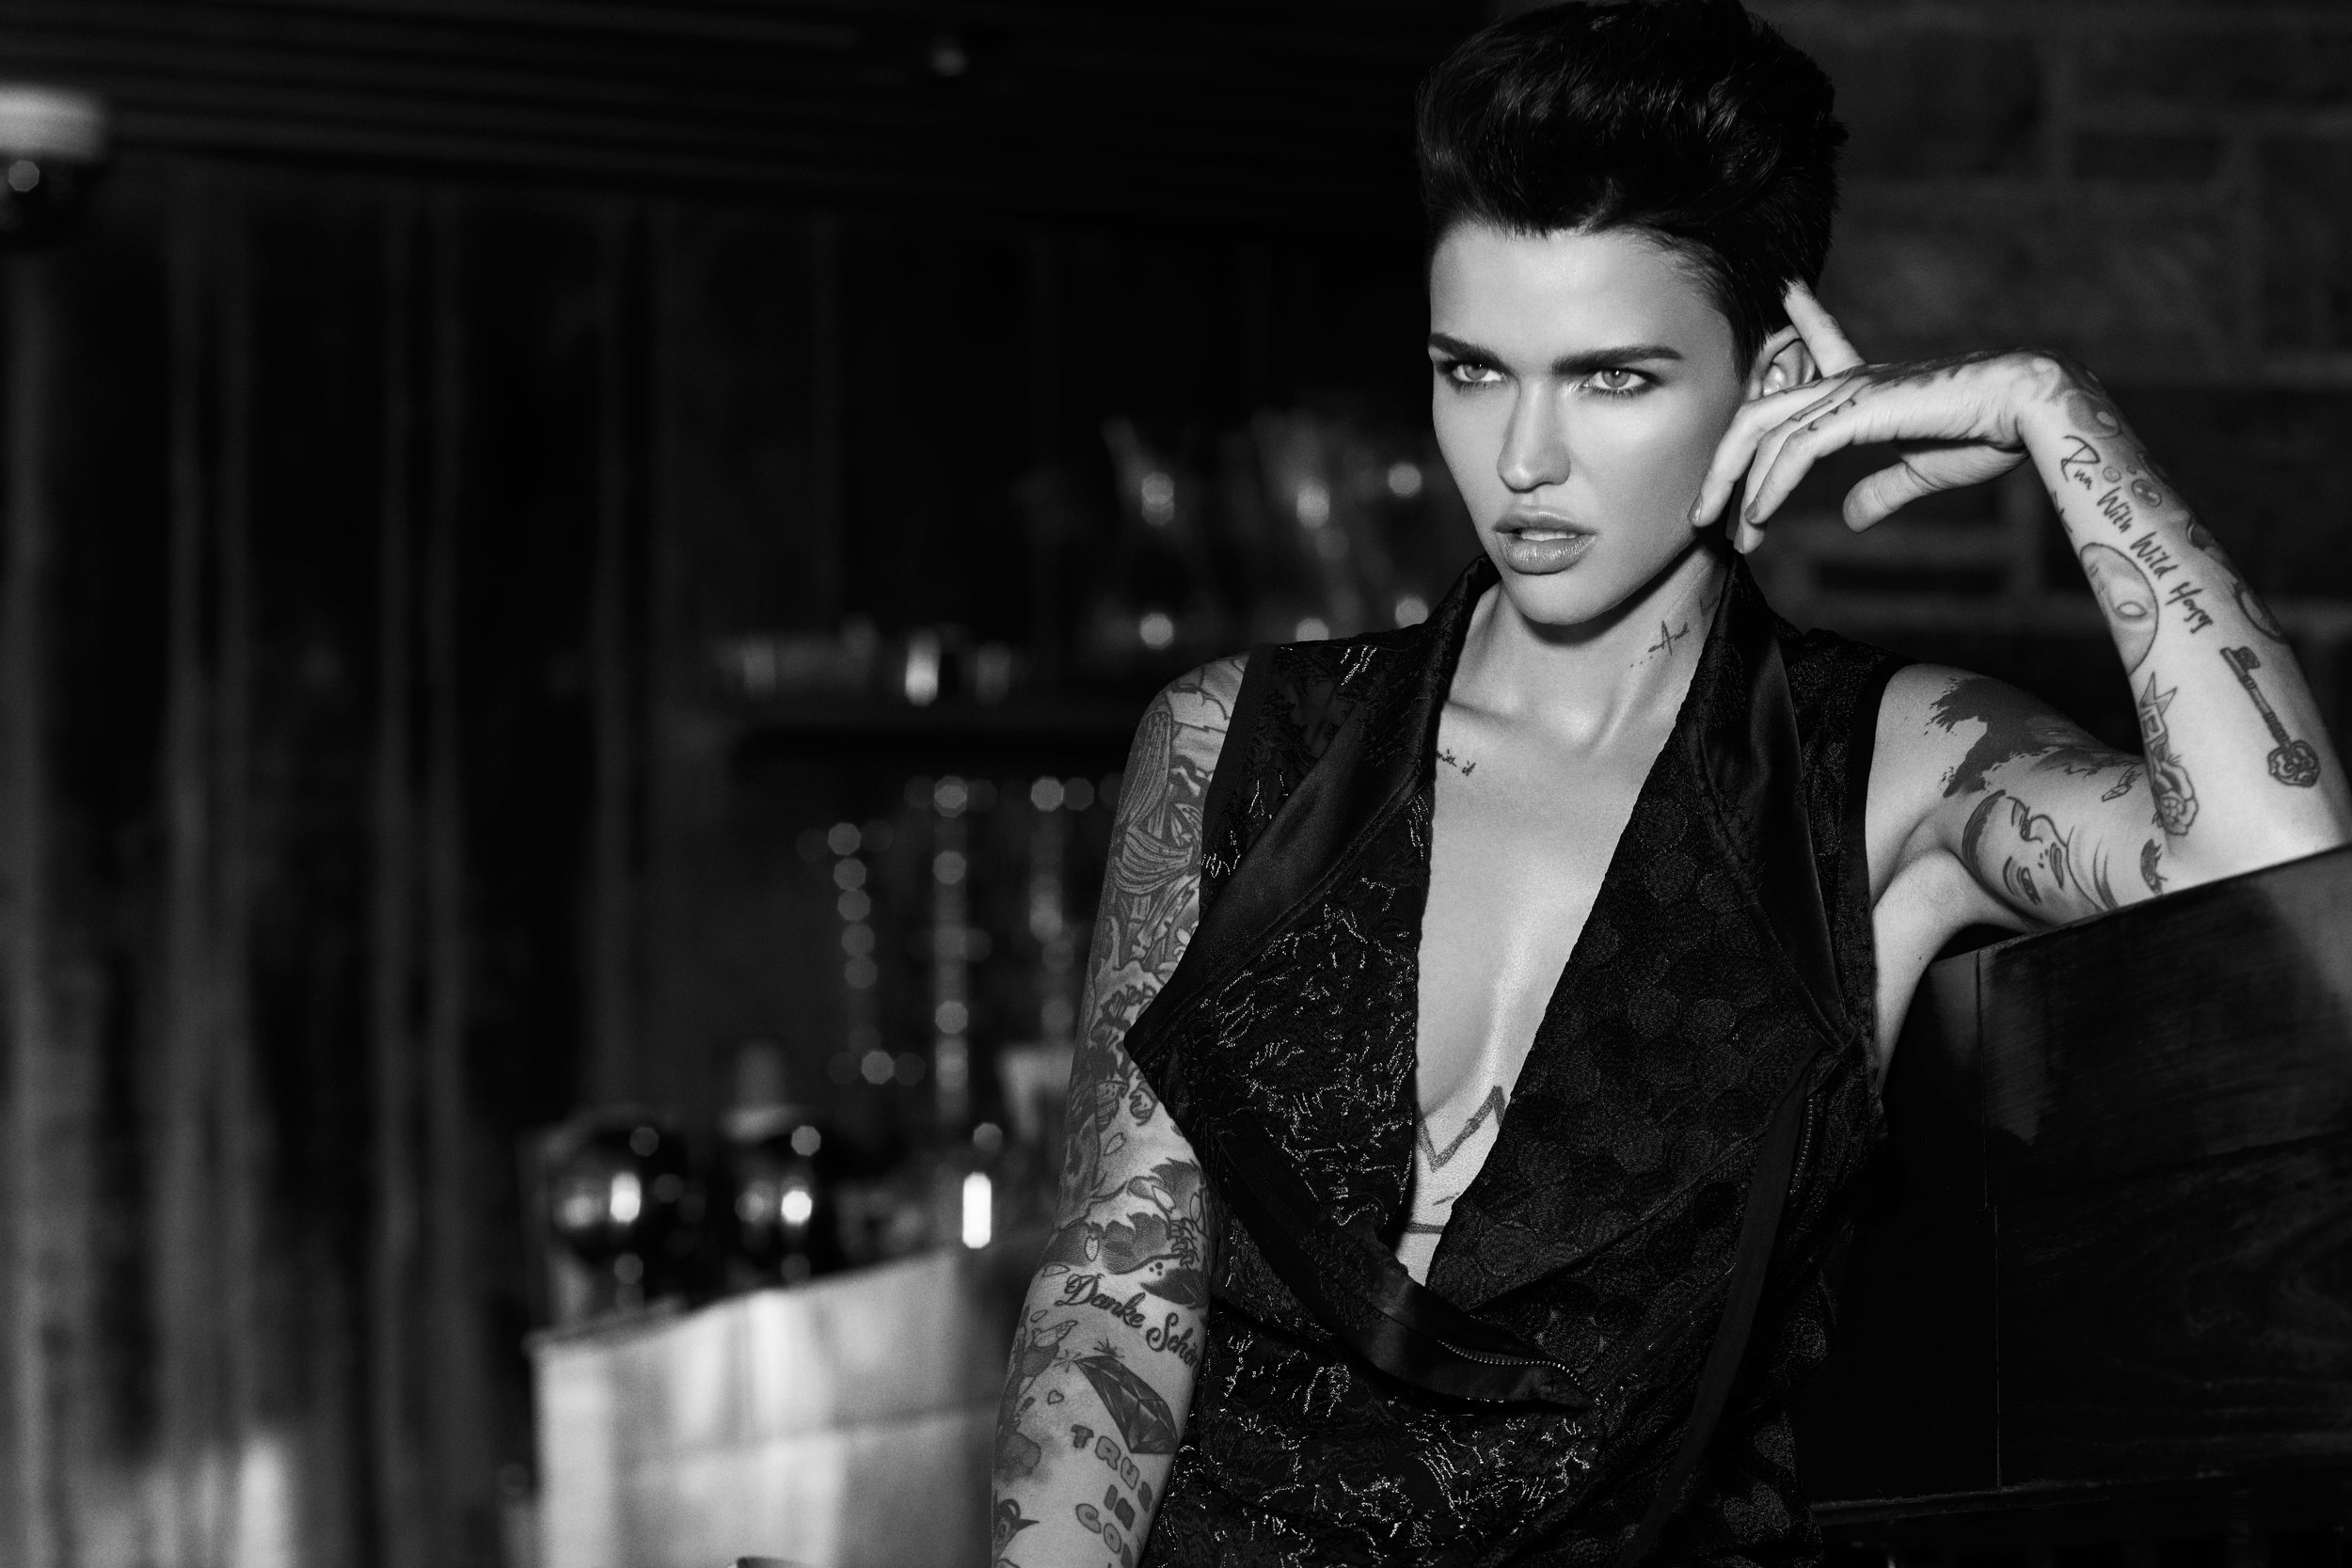 Ruby Rose Monochrome Hd Celebrities 4k Wallpapers Images 4891